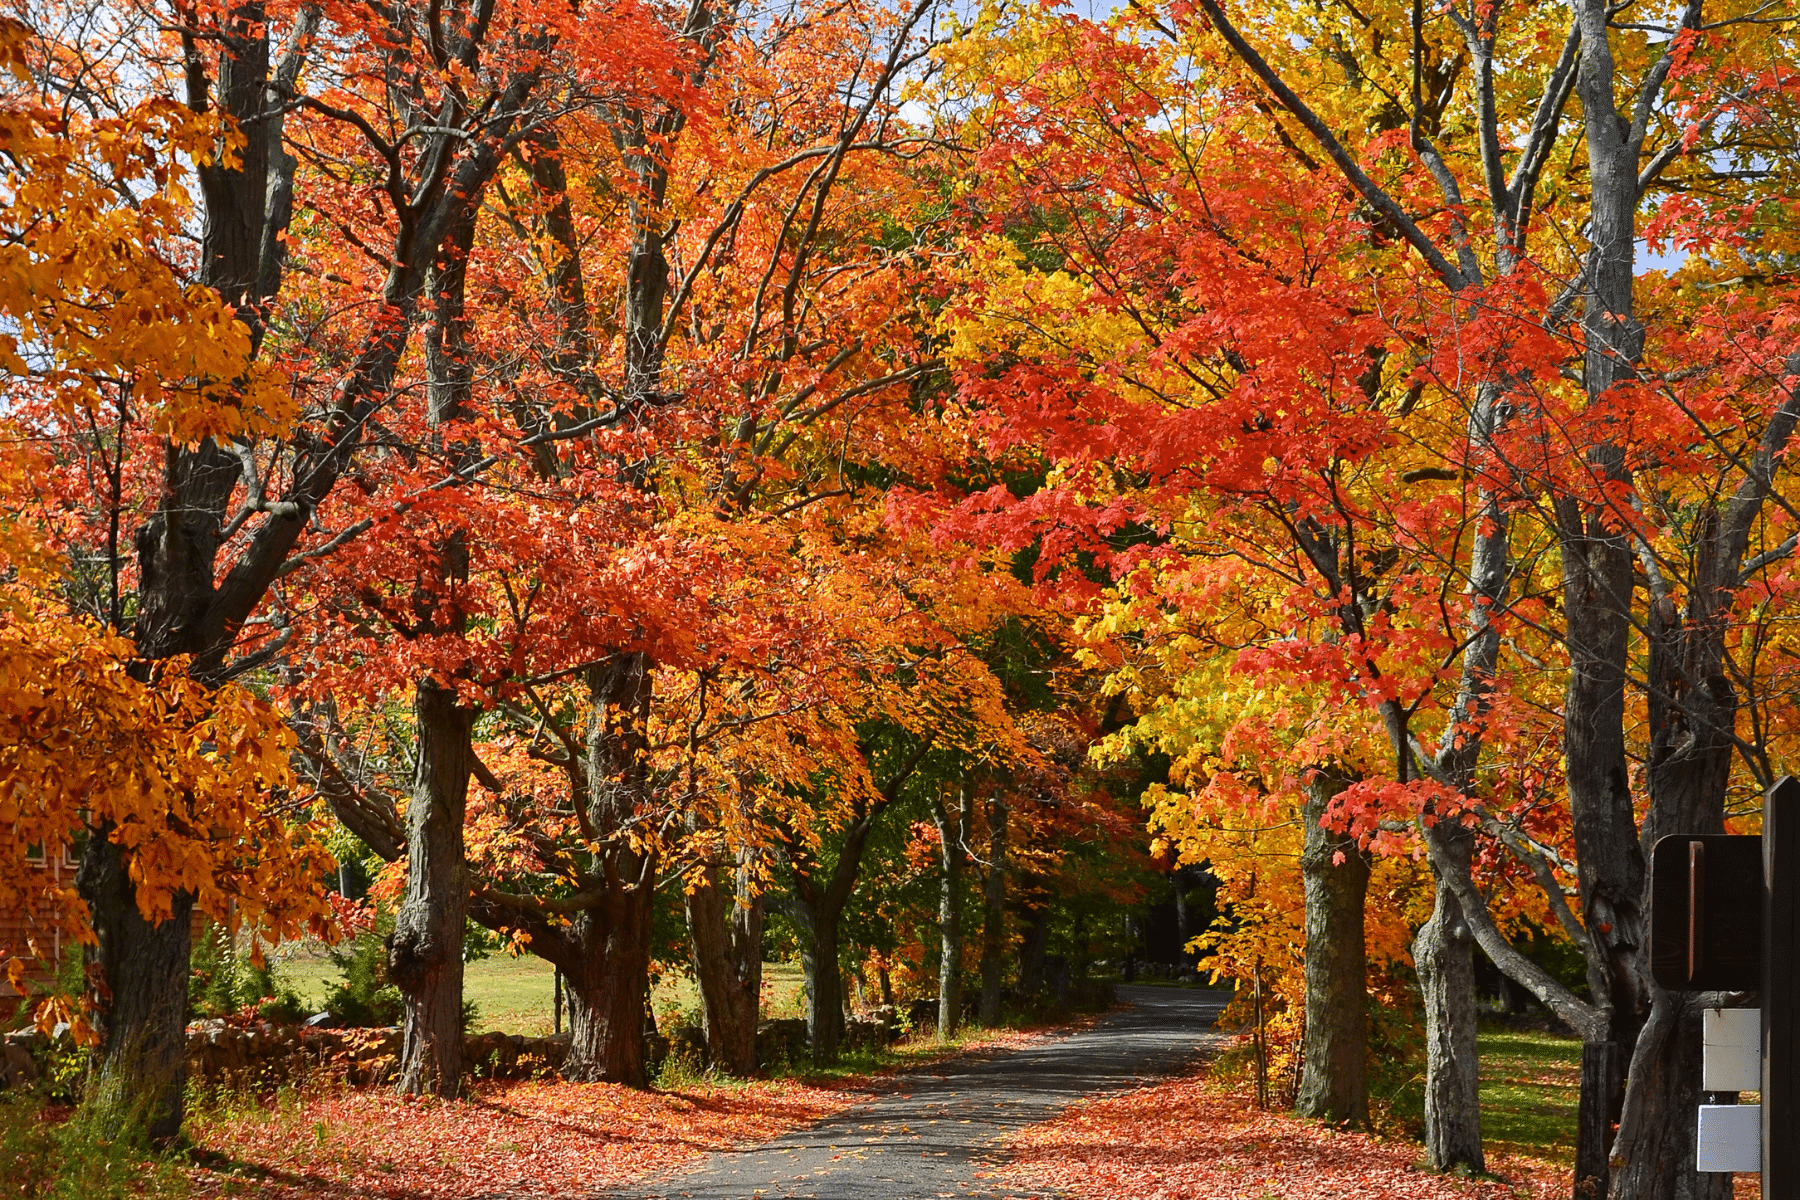 Autumn trees with red and gold leaves on either side of a road.